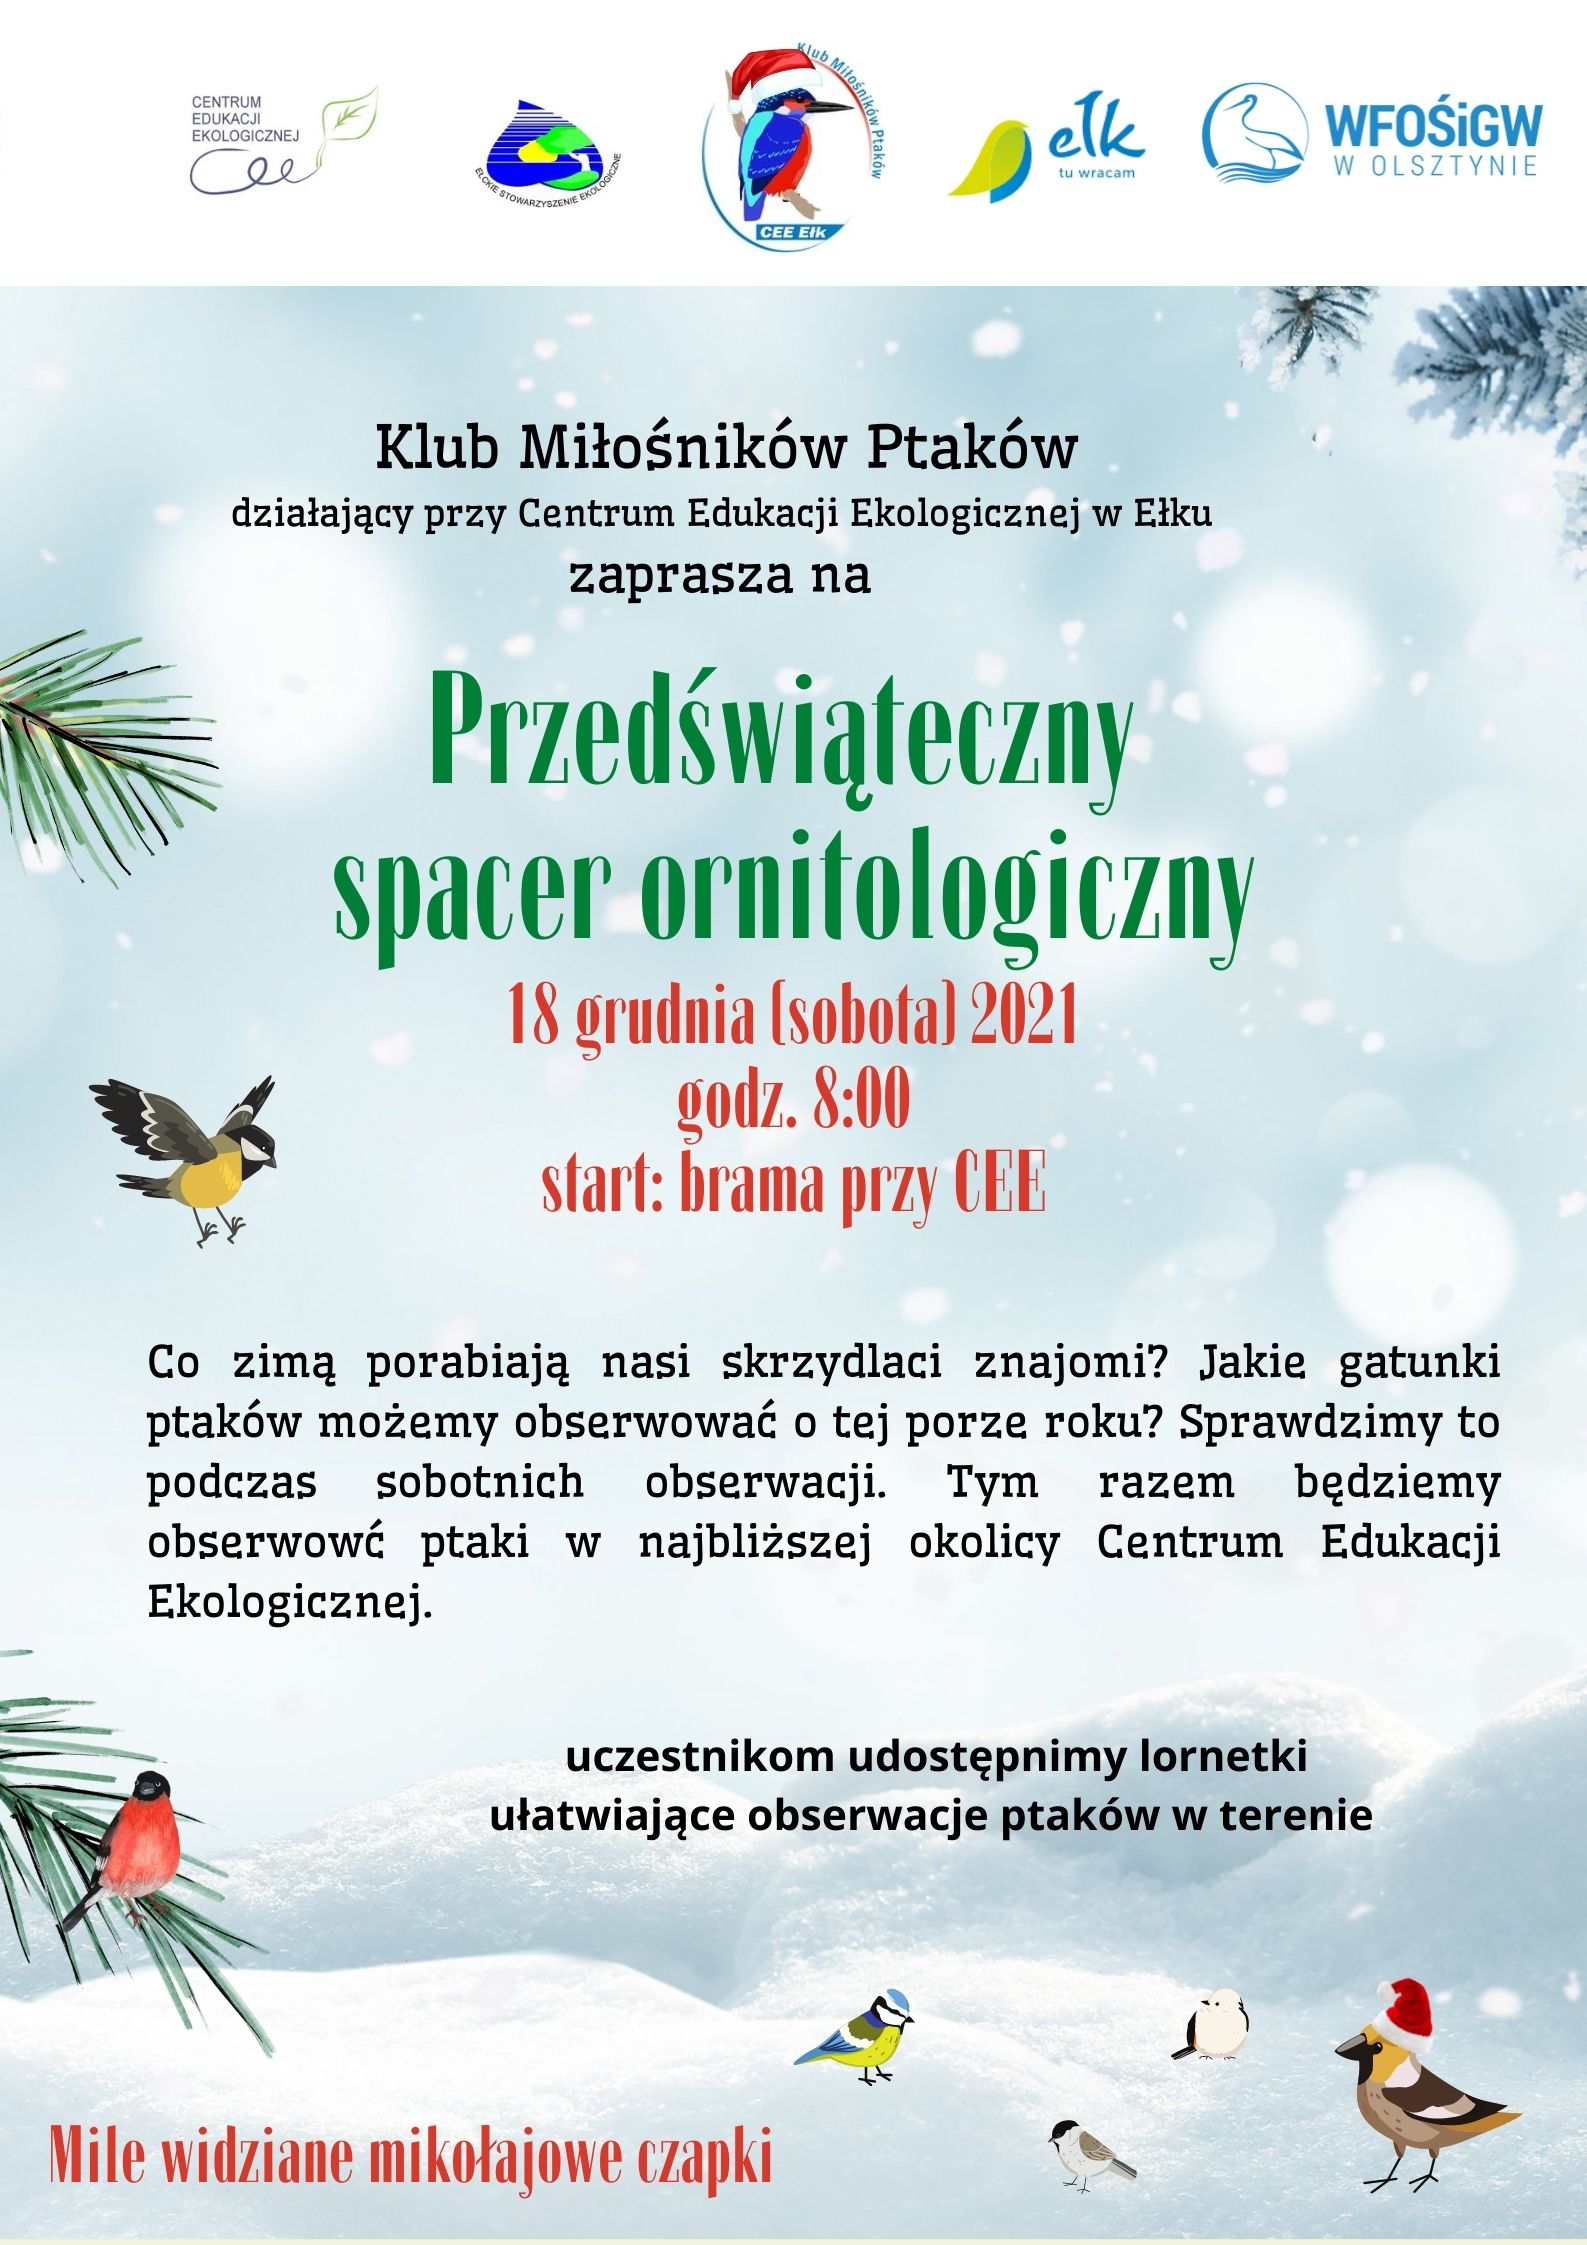 Spacer ornitologiczny 18.12.2021 (1).jpg